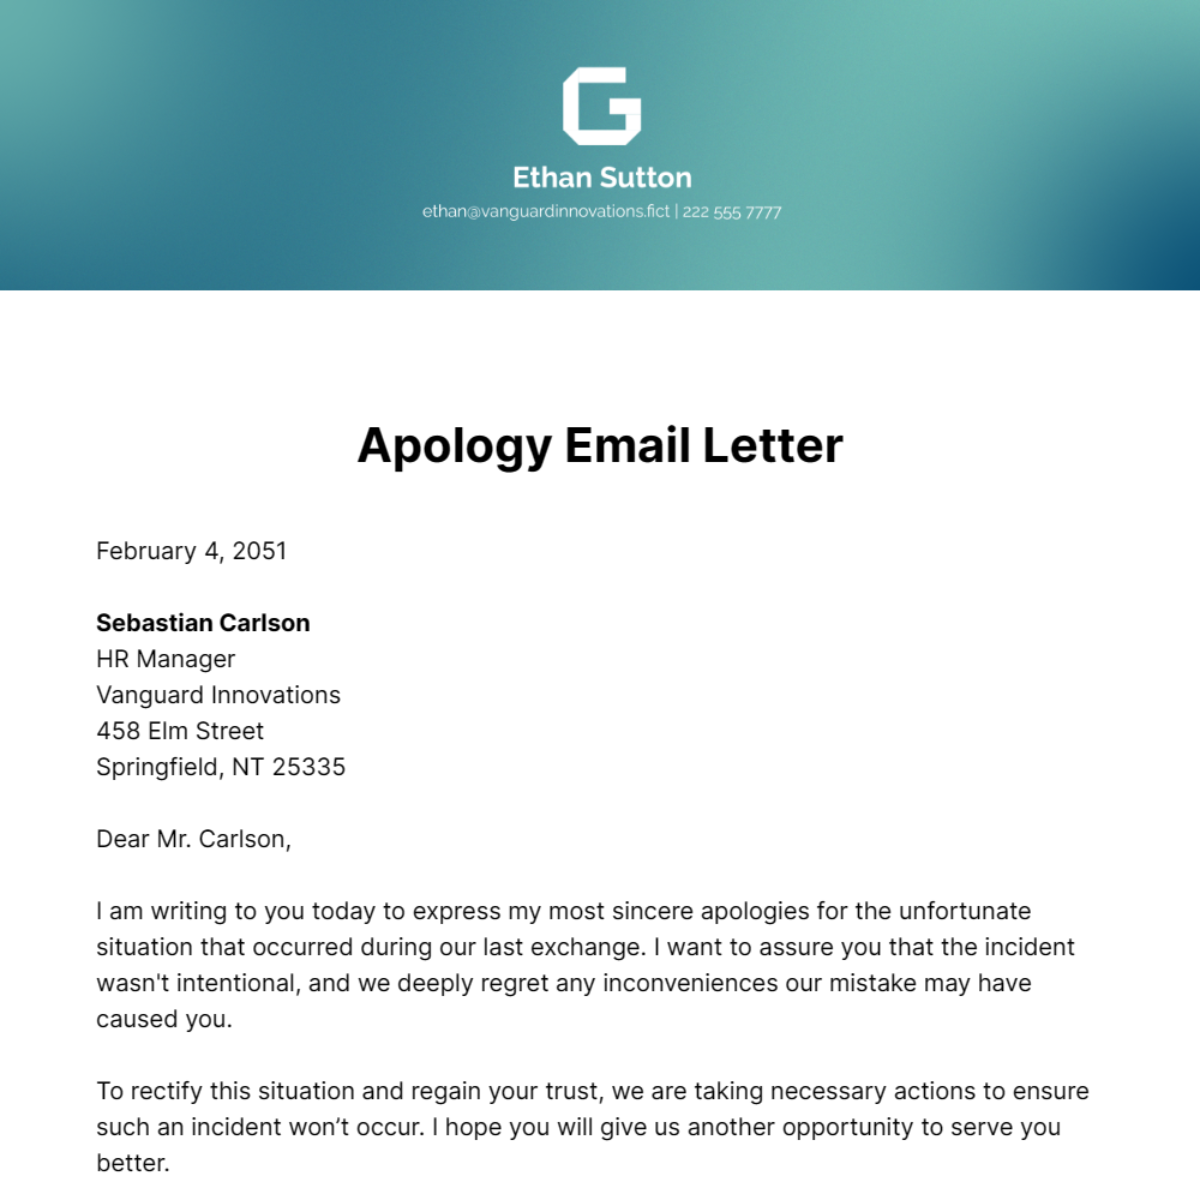 Apology Email Letter Template